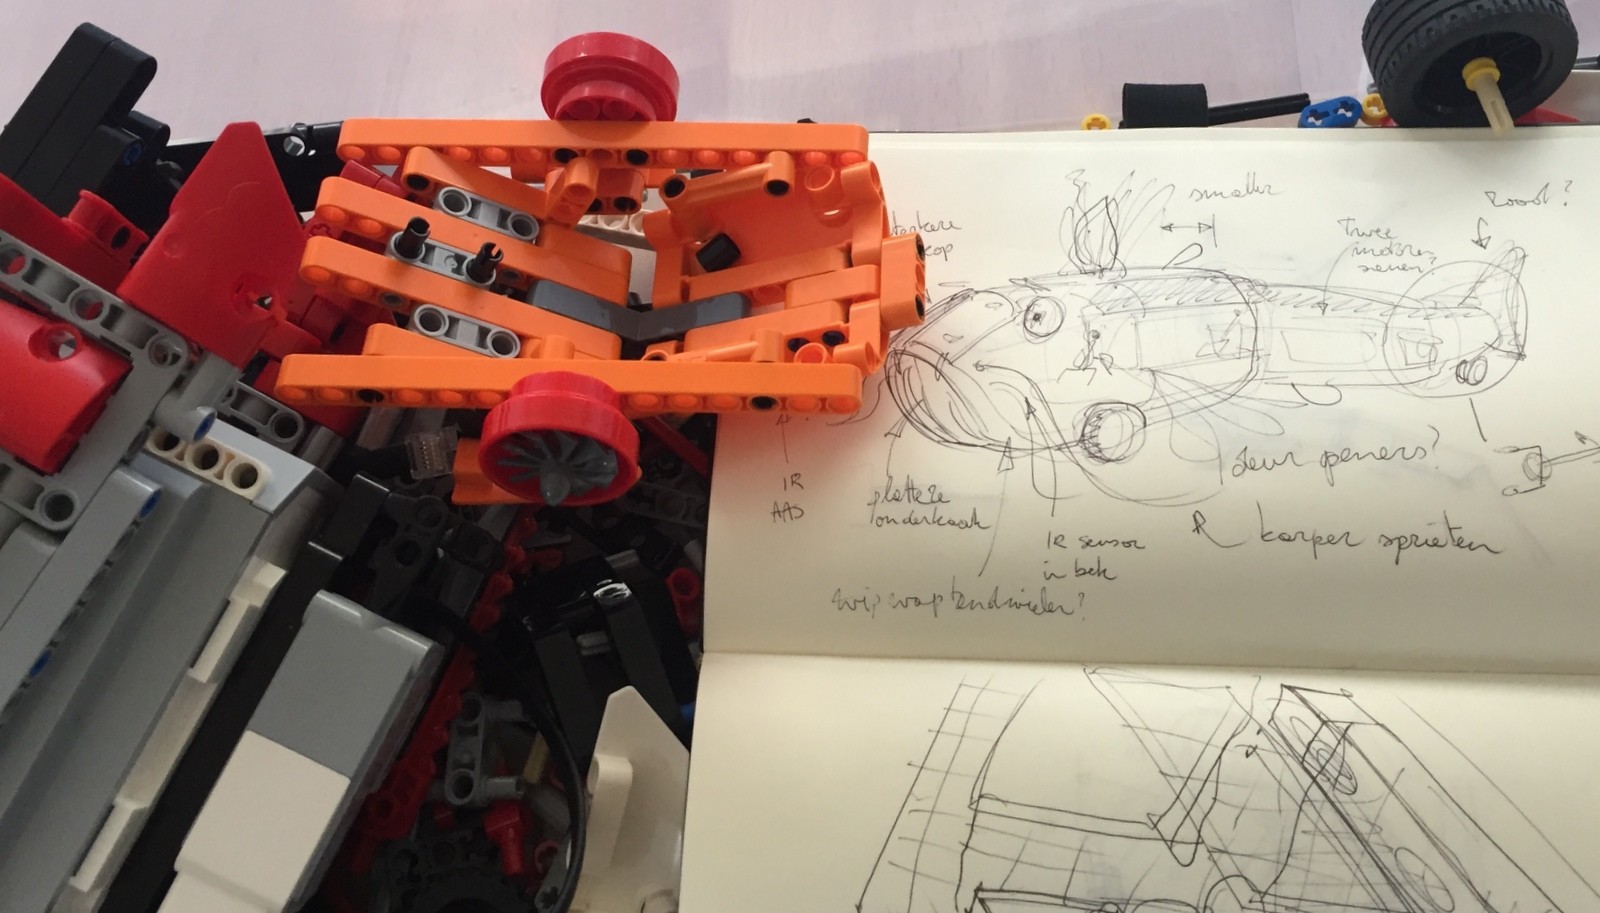 Catfish building instructions with MINDSTORMS EV3